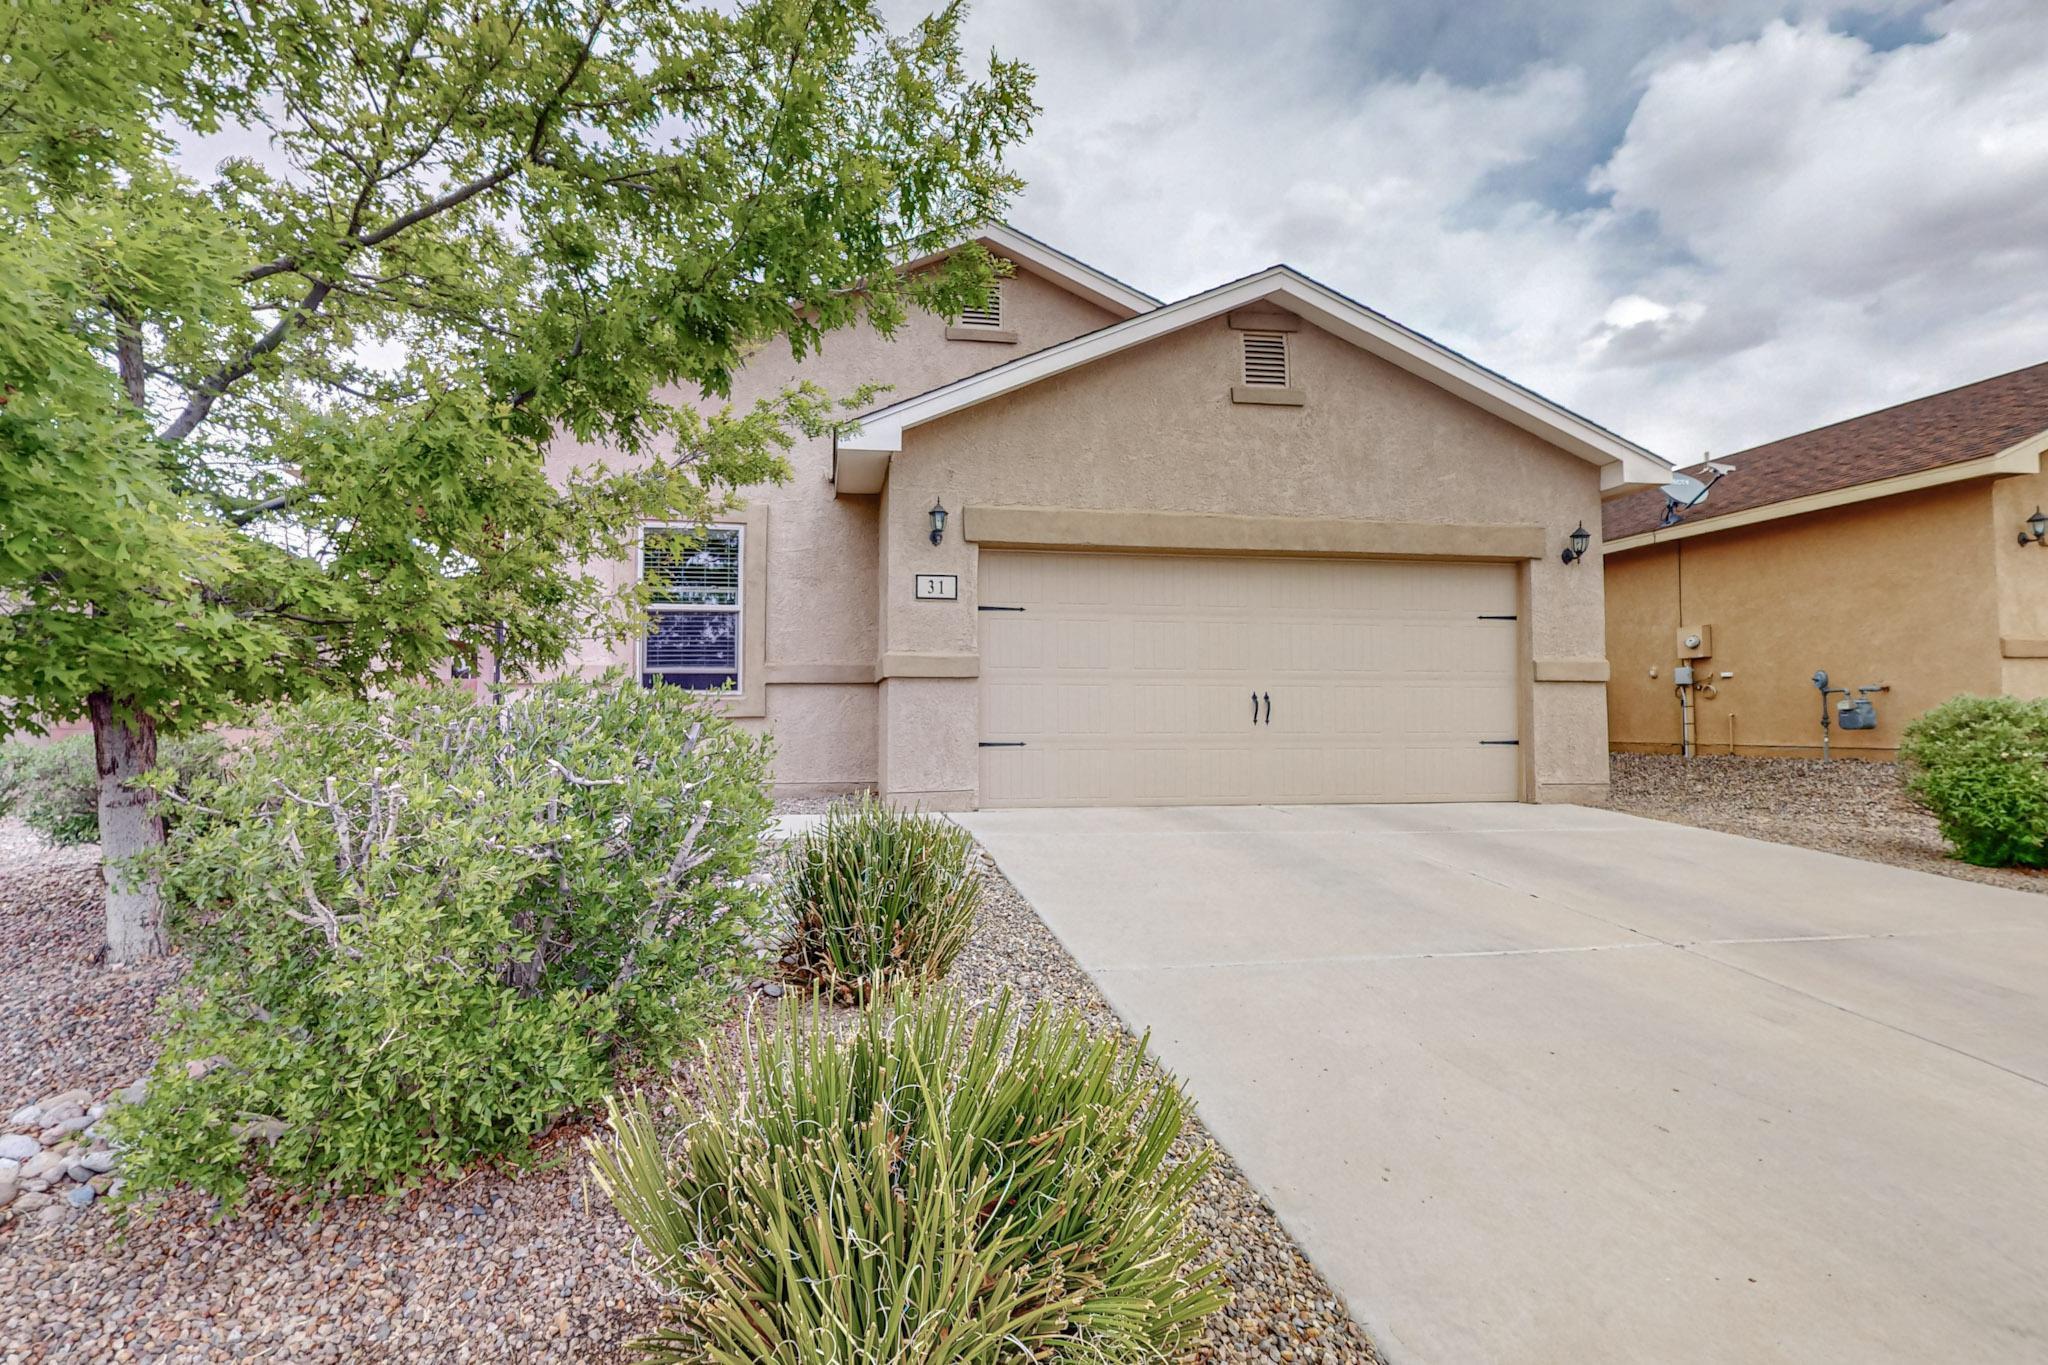 Welcome home to this bright and airy home.  Nice open floorplan with 3 bedrooms and 2 baths.  Xeriscape backyard for low maintenance. Good school districts.  All appliances convey.